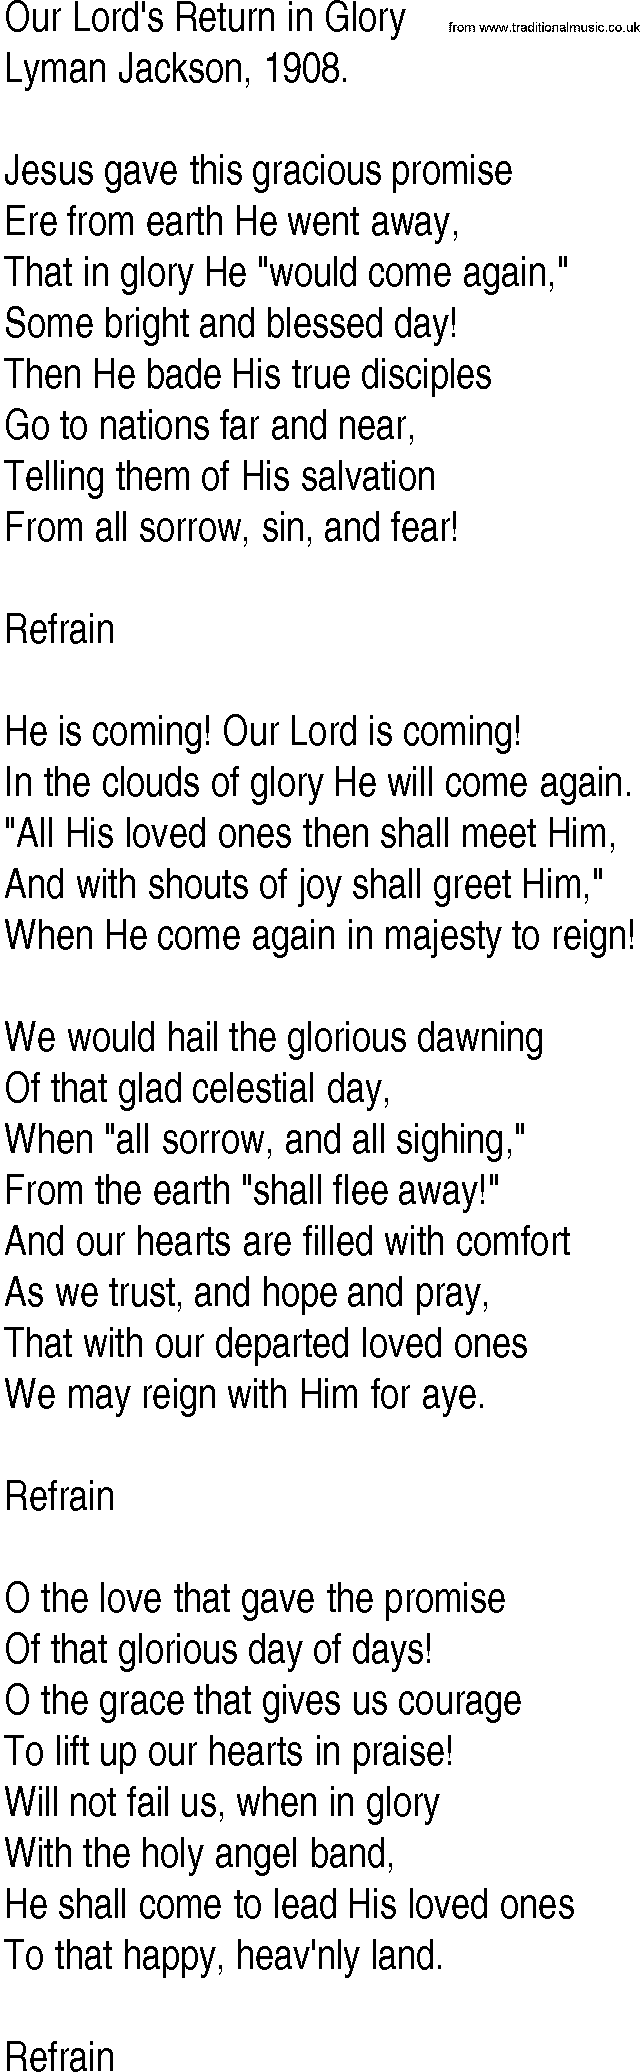 Hymn and Gospel Song: Our Lord's Return in Glory by Lyman Jackson lyrics